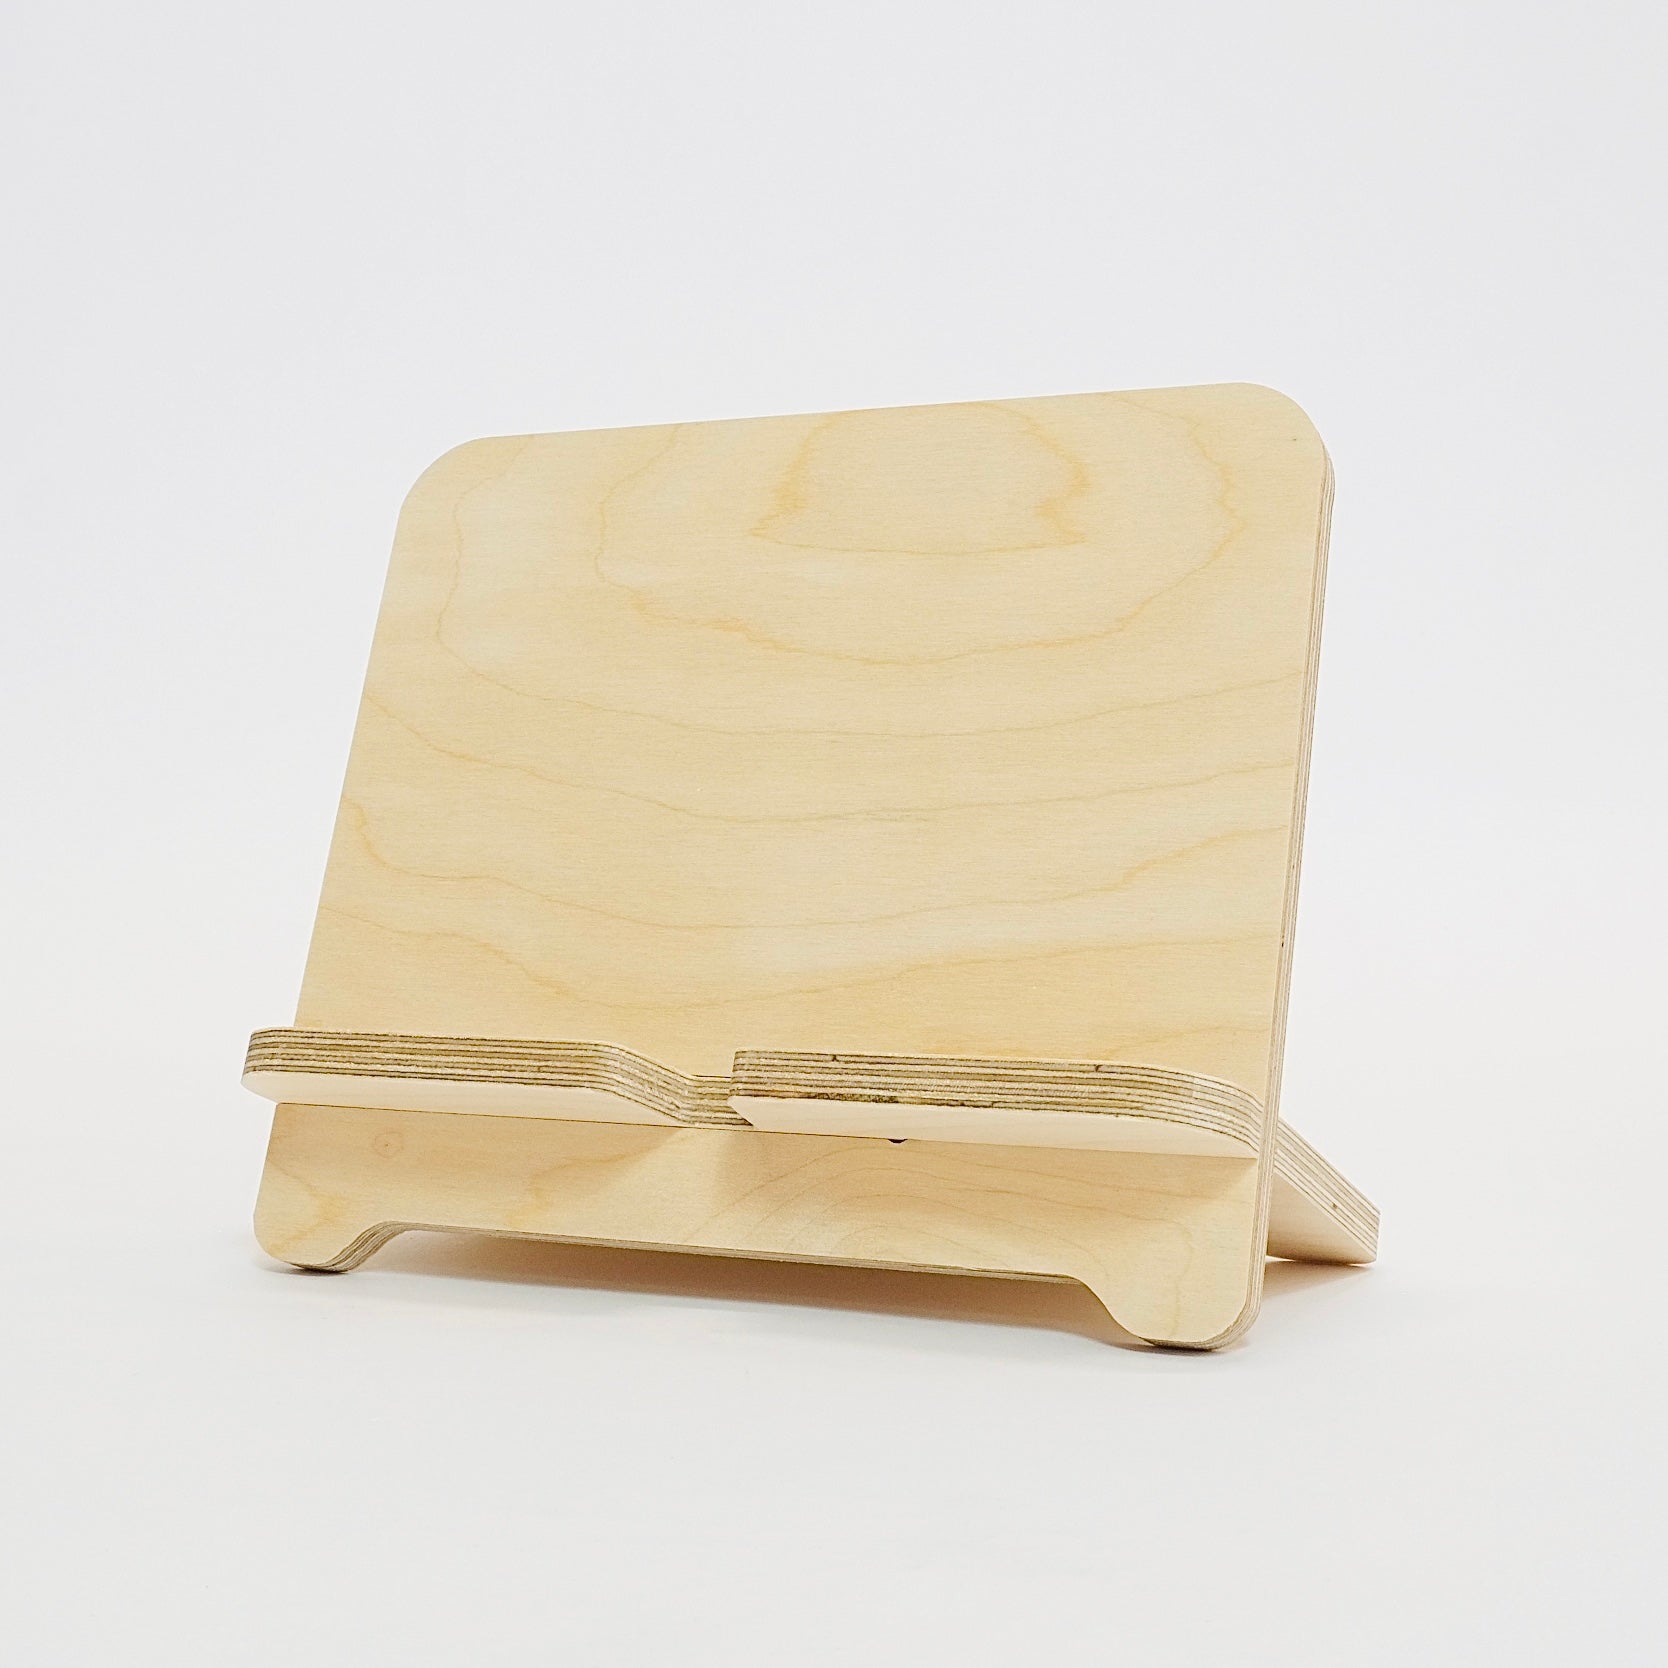 A birch plywood tablet stand, angled to the left.